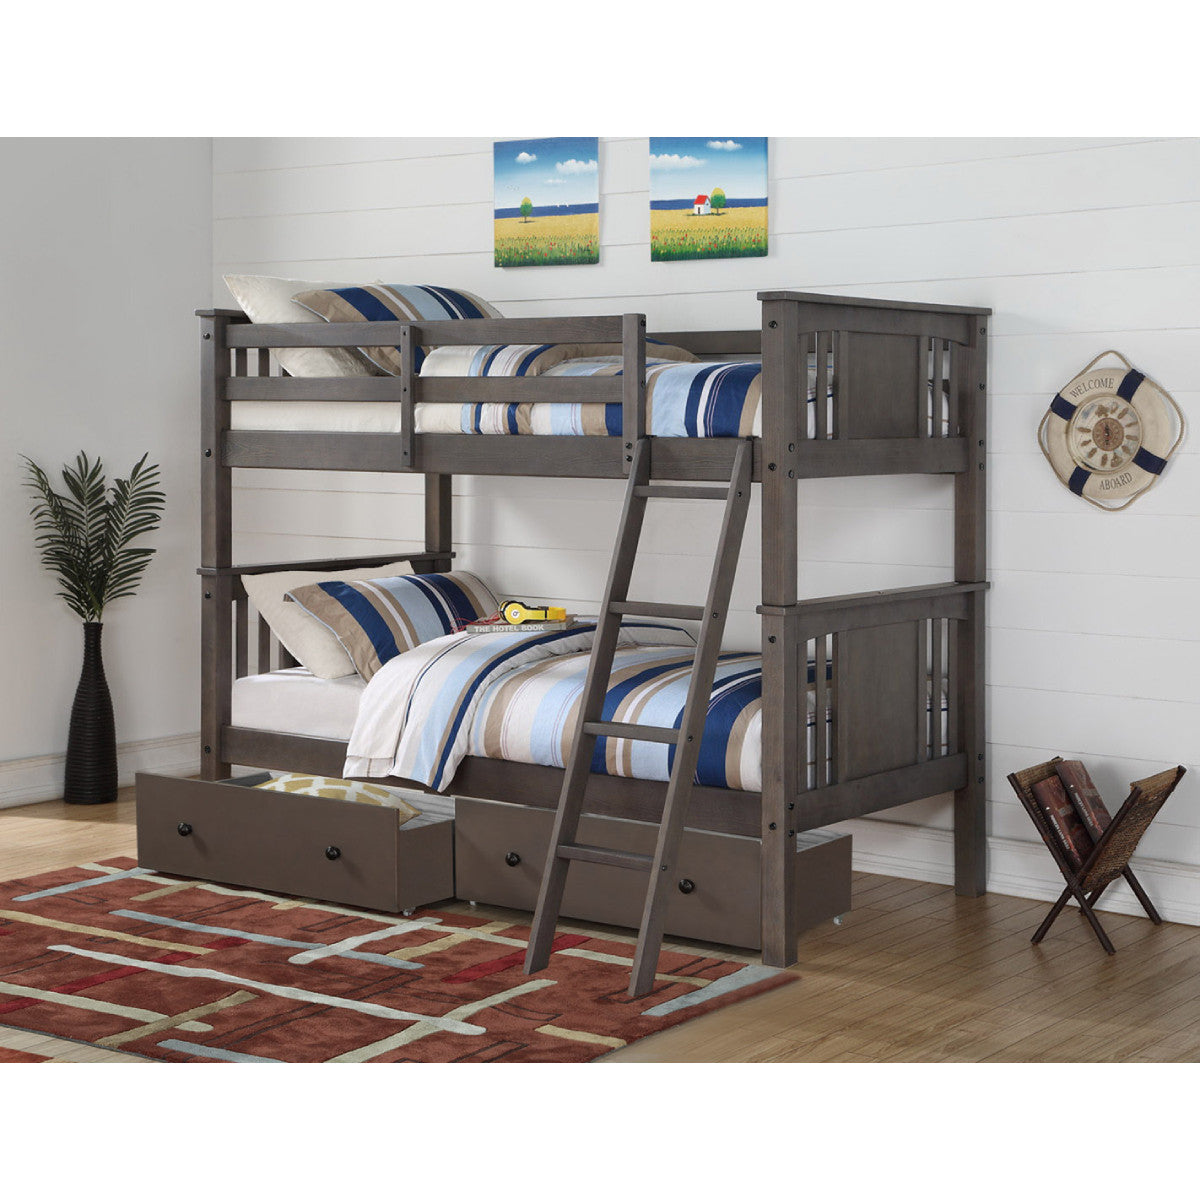 TWIN/TWIN PRINCETON PANEL/MISSION BUNK BED WITH DUAL UNDERBED DRAWERS IN SLATE GREY FINISH